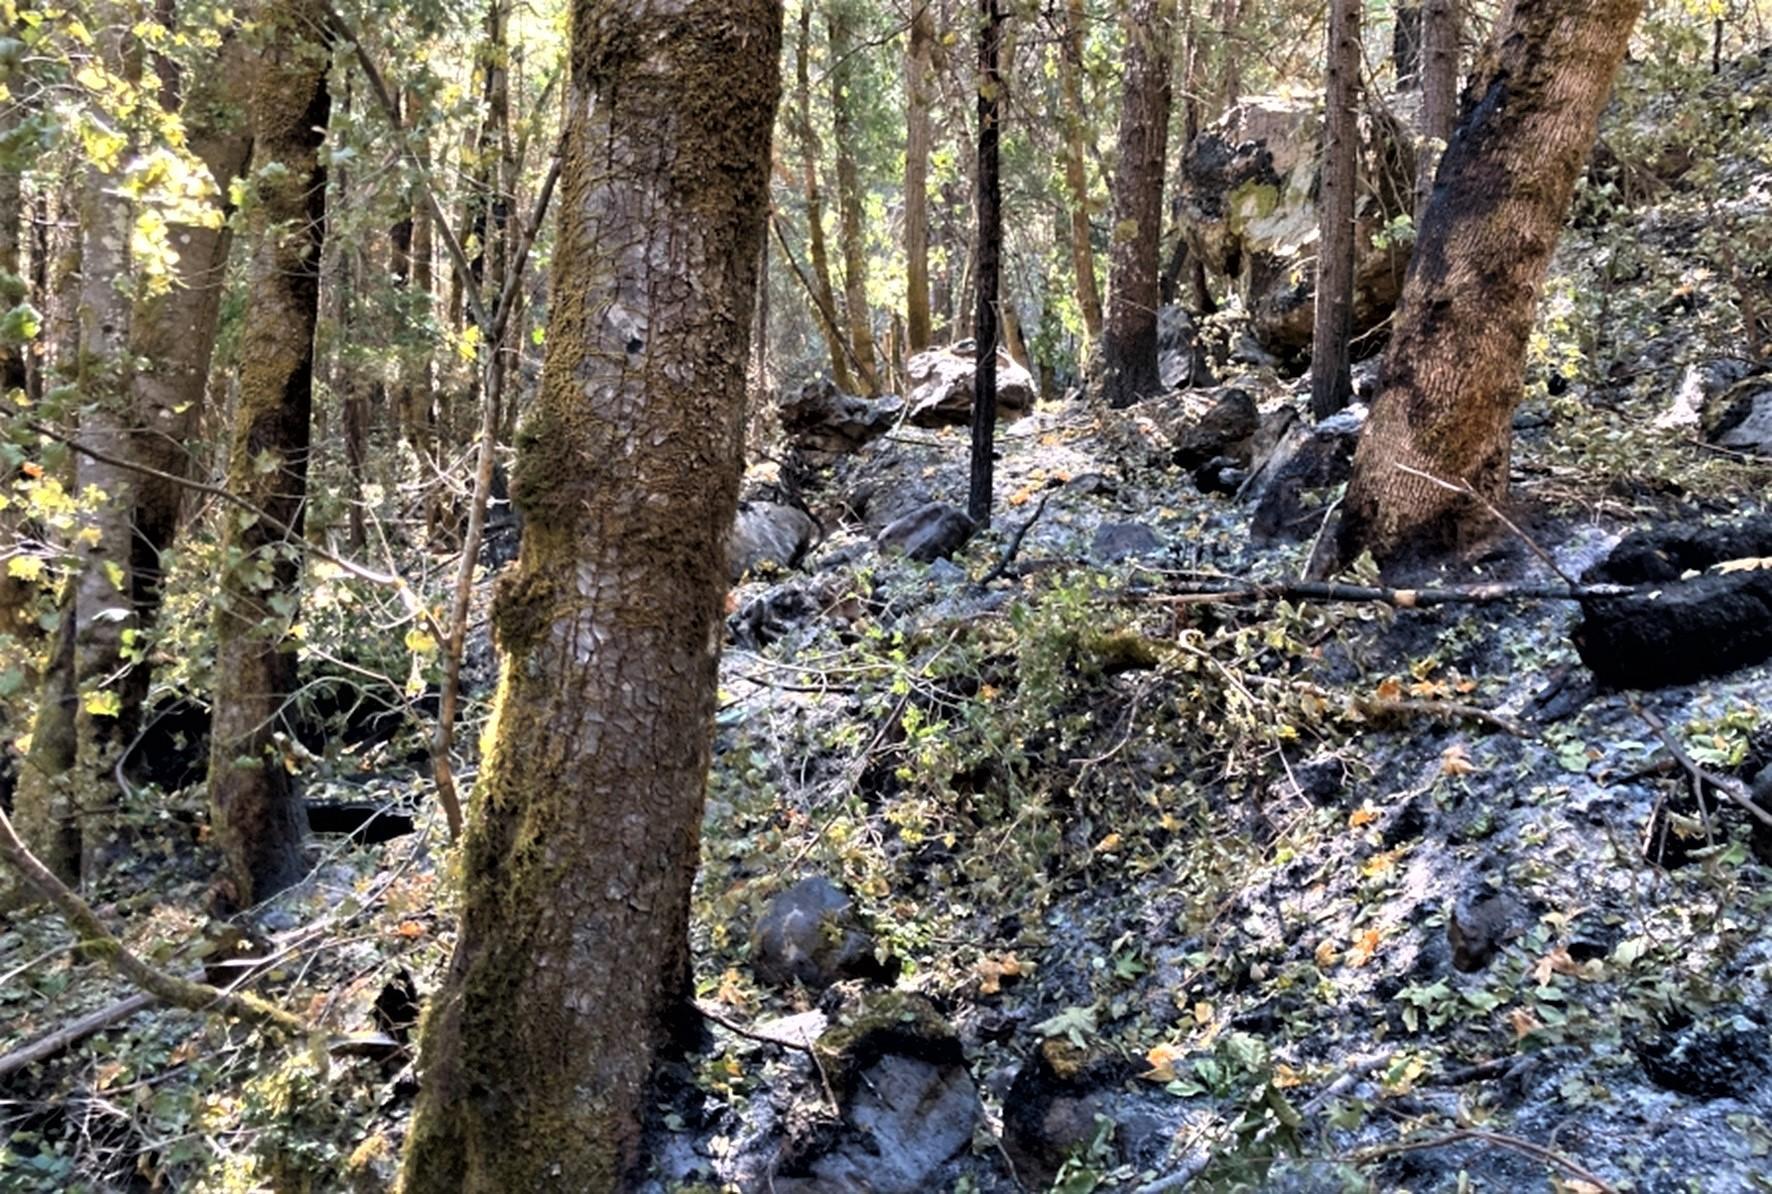 Image showing West Grider Creek loaded  with rocks-boulders-cobble stones